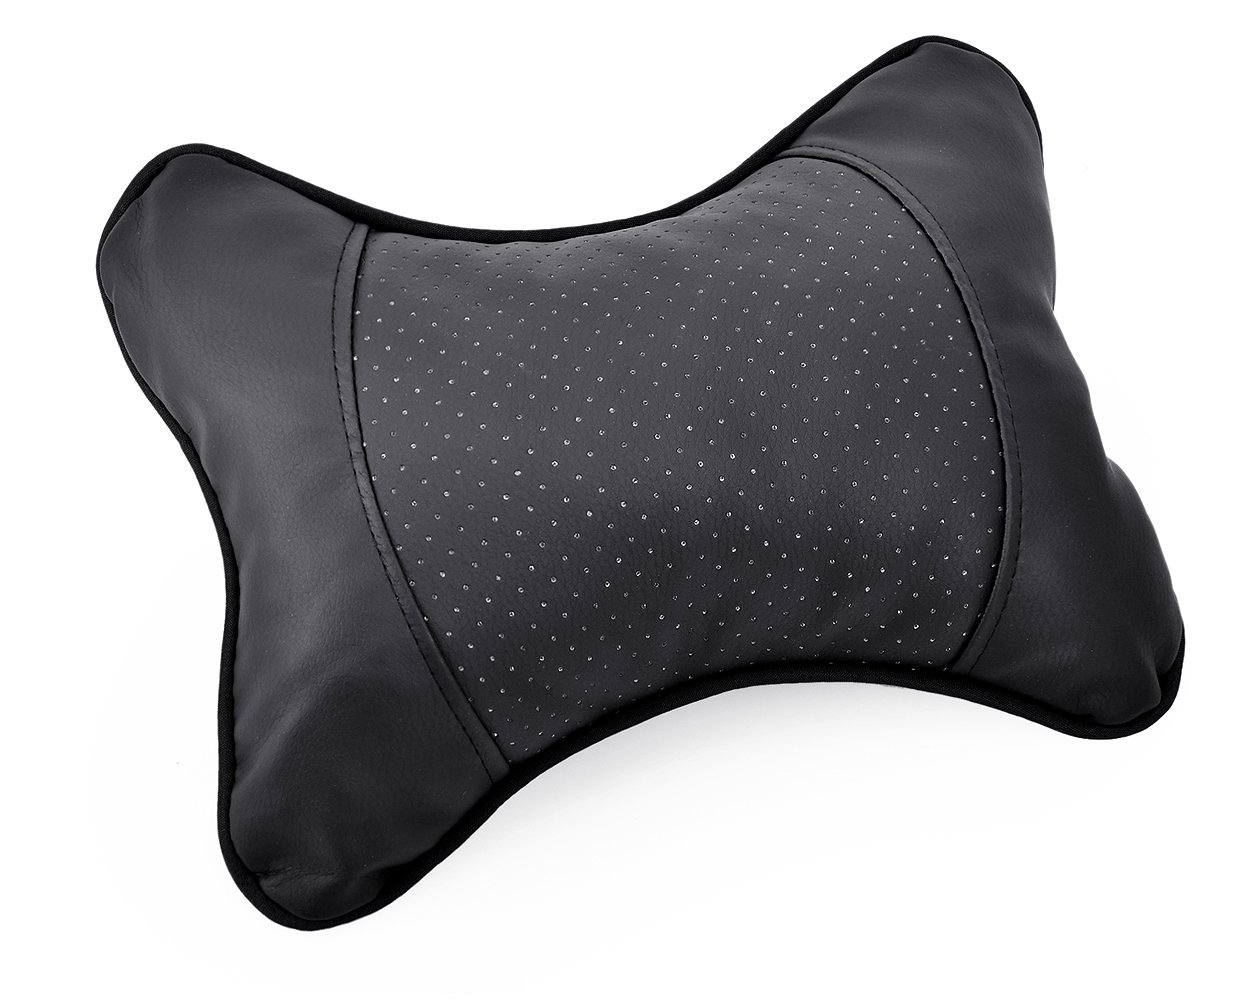 Black Ace Select Car Neck Pillow 2 Pieces PU Leather Travel Pillow for Head Rest  Neck Support for Car Seat Bedding & Linen Home urbytus.com